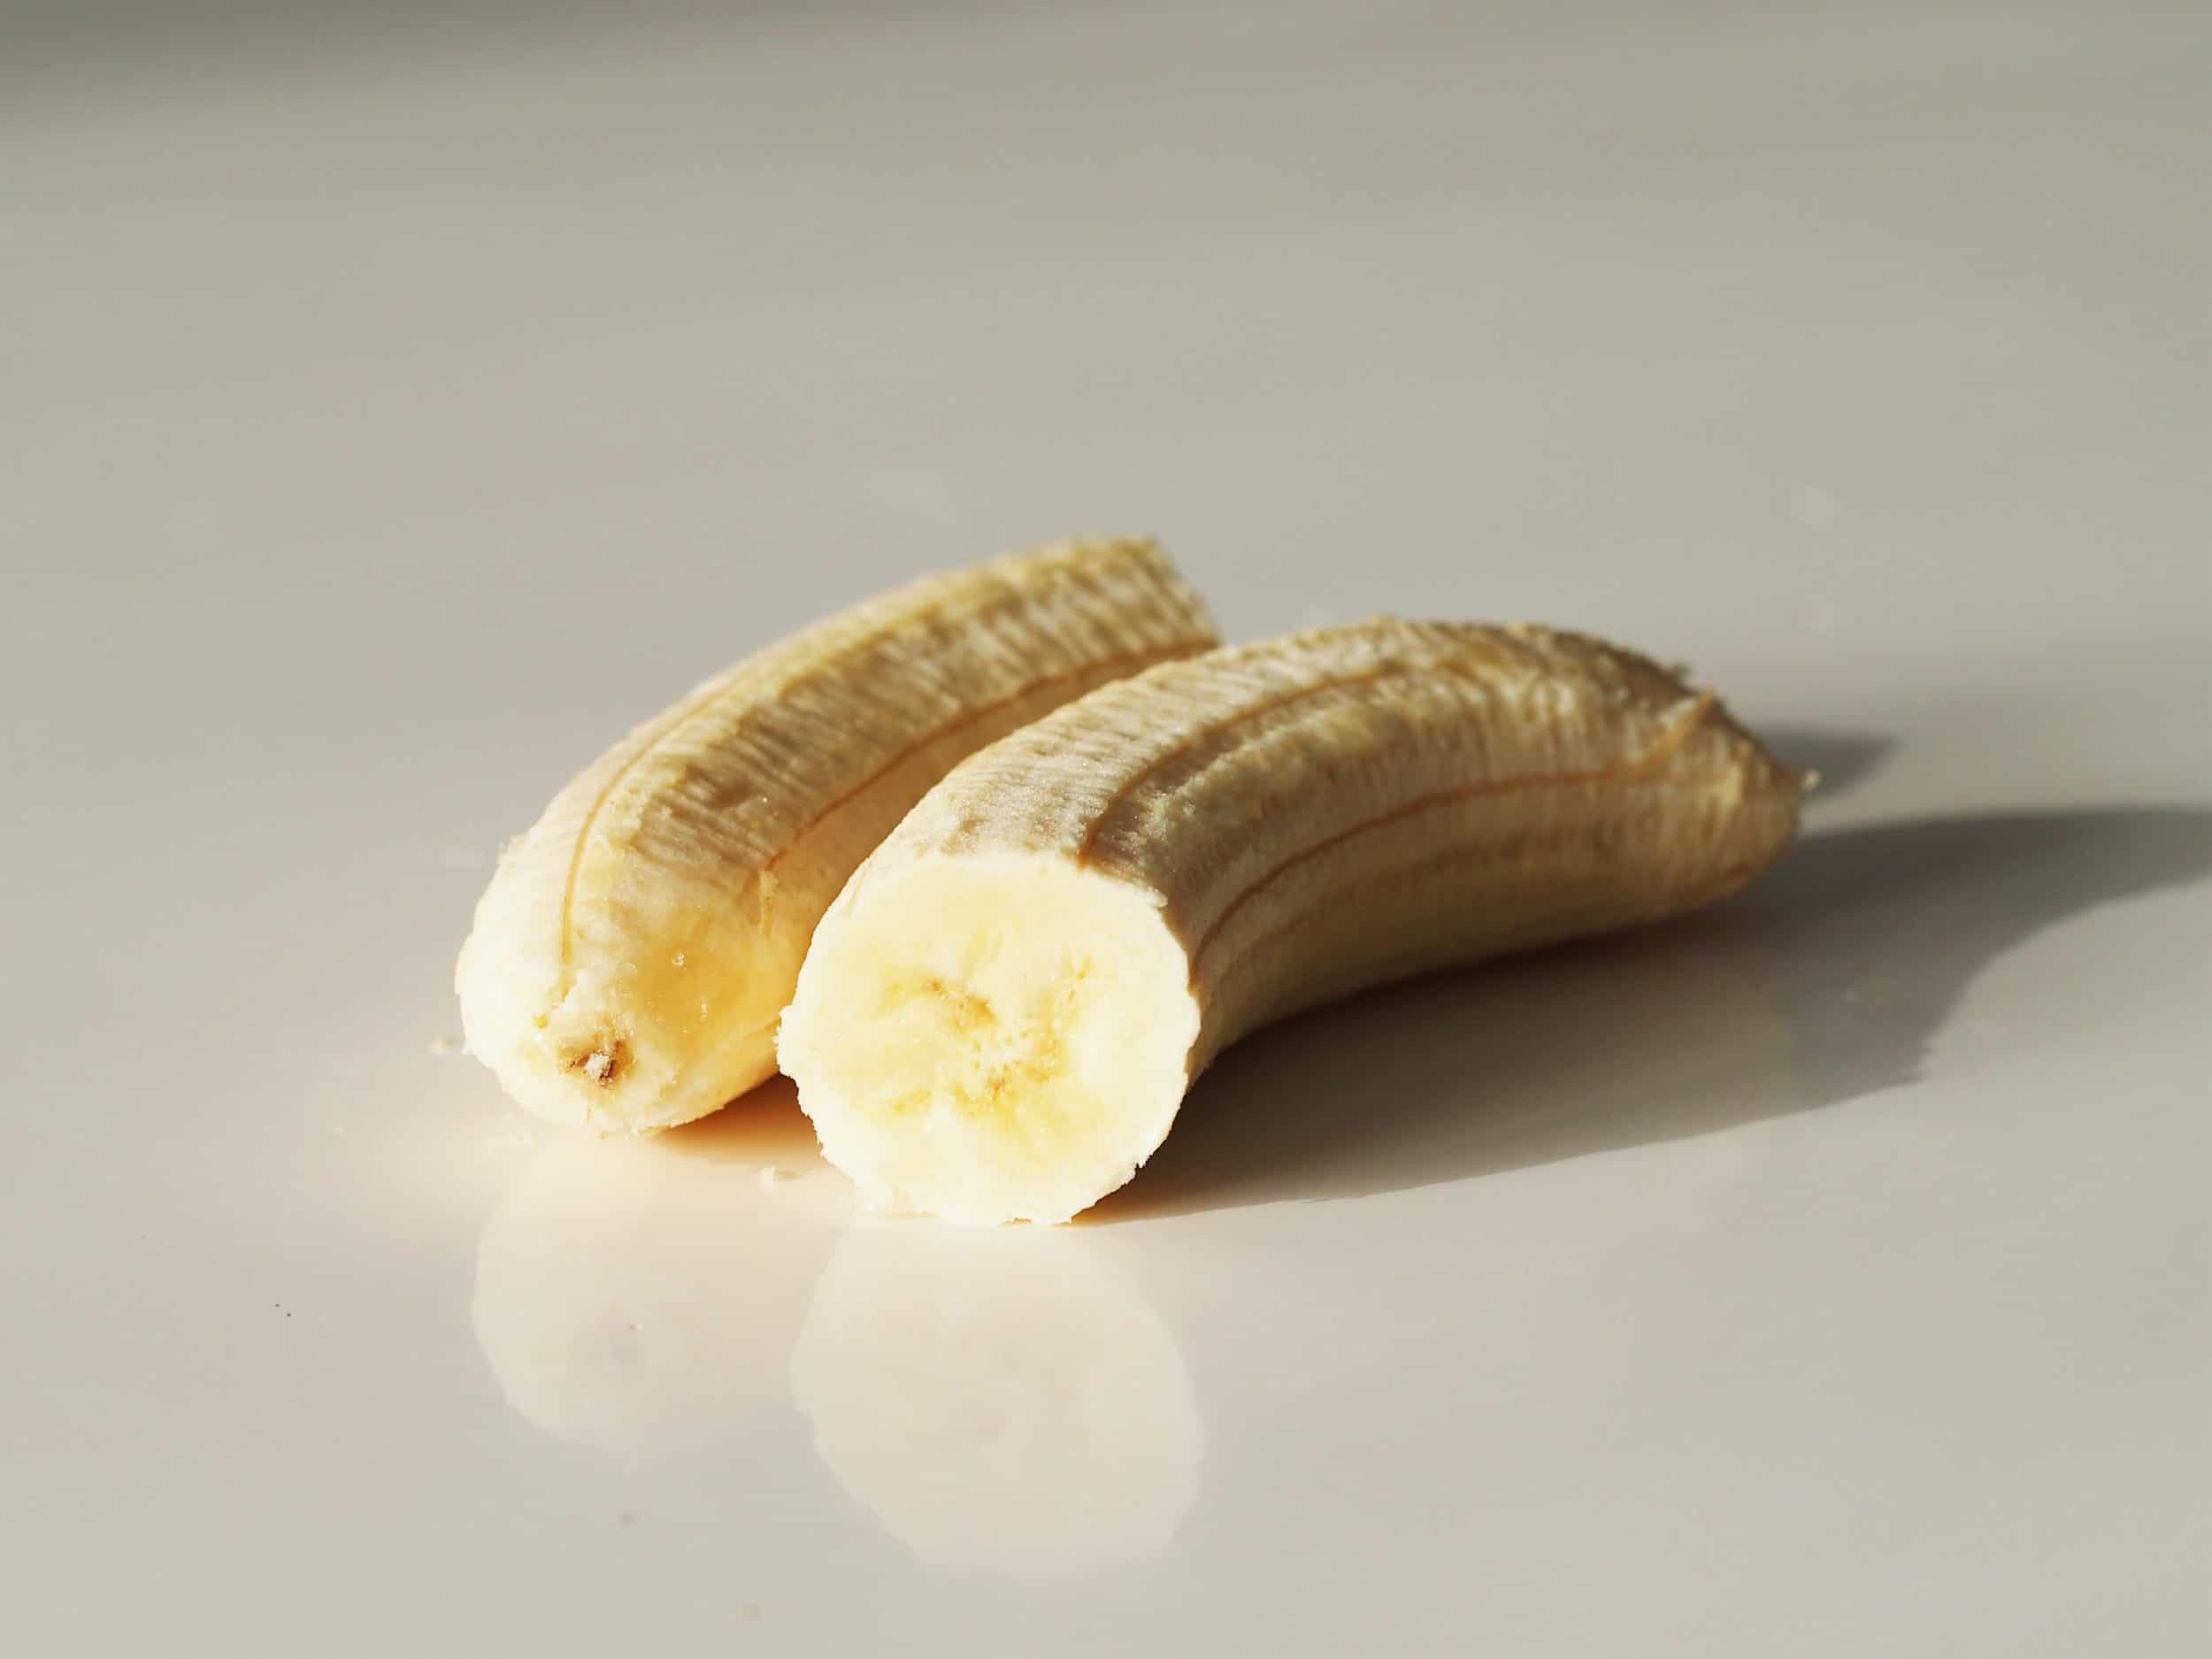 how-to-cut-banana-for-baby-6-months